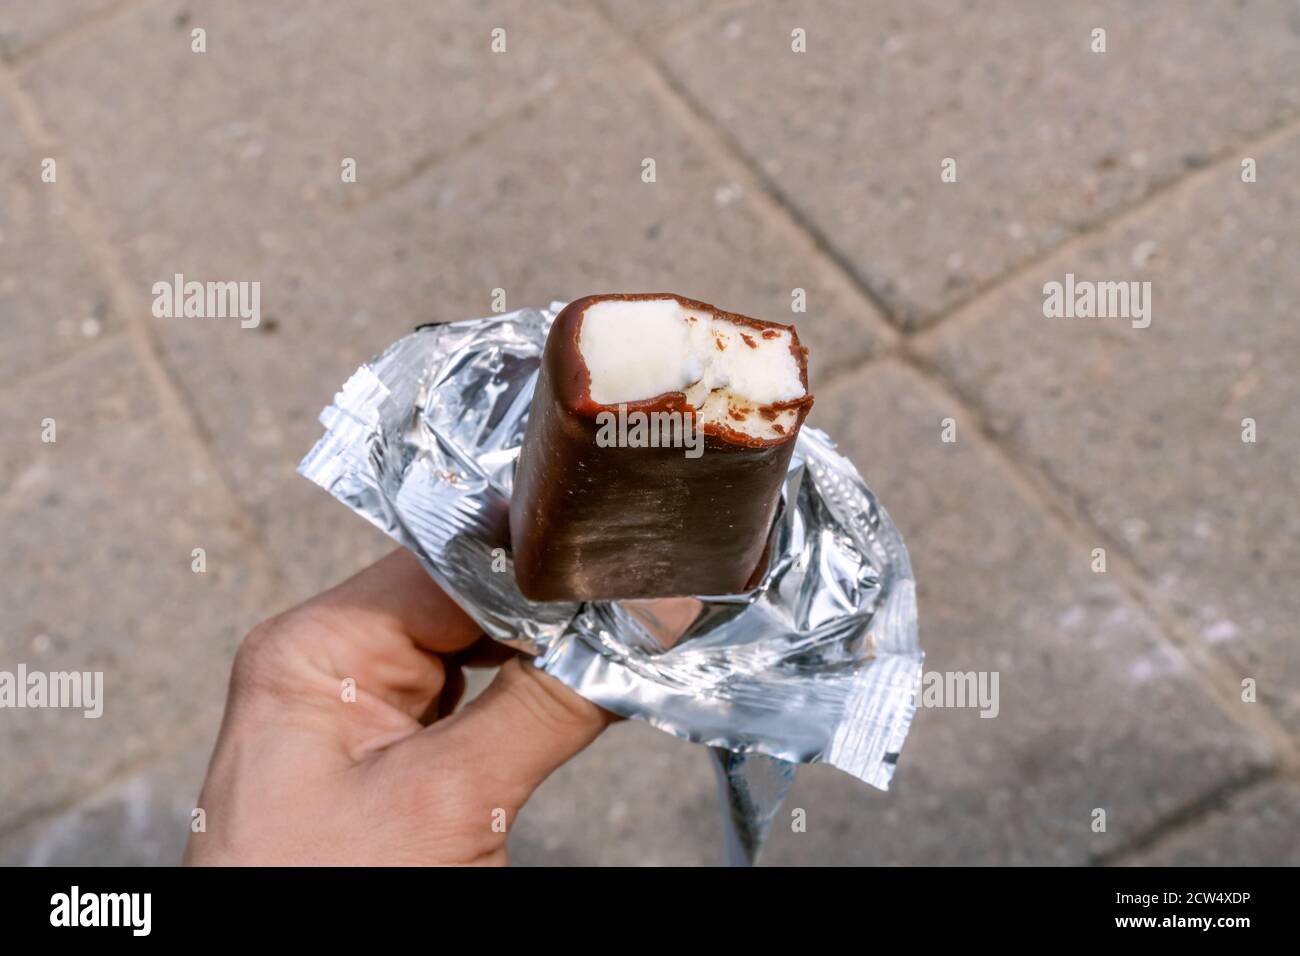 The hand of a man holding a white ice cream covered with chocolate in a wrapper on the background of the plates Stock Photo